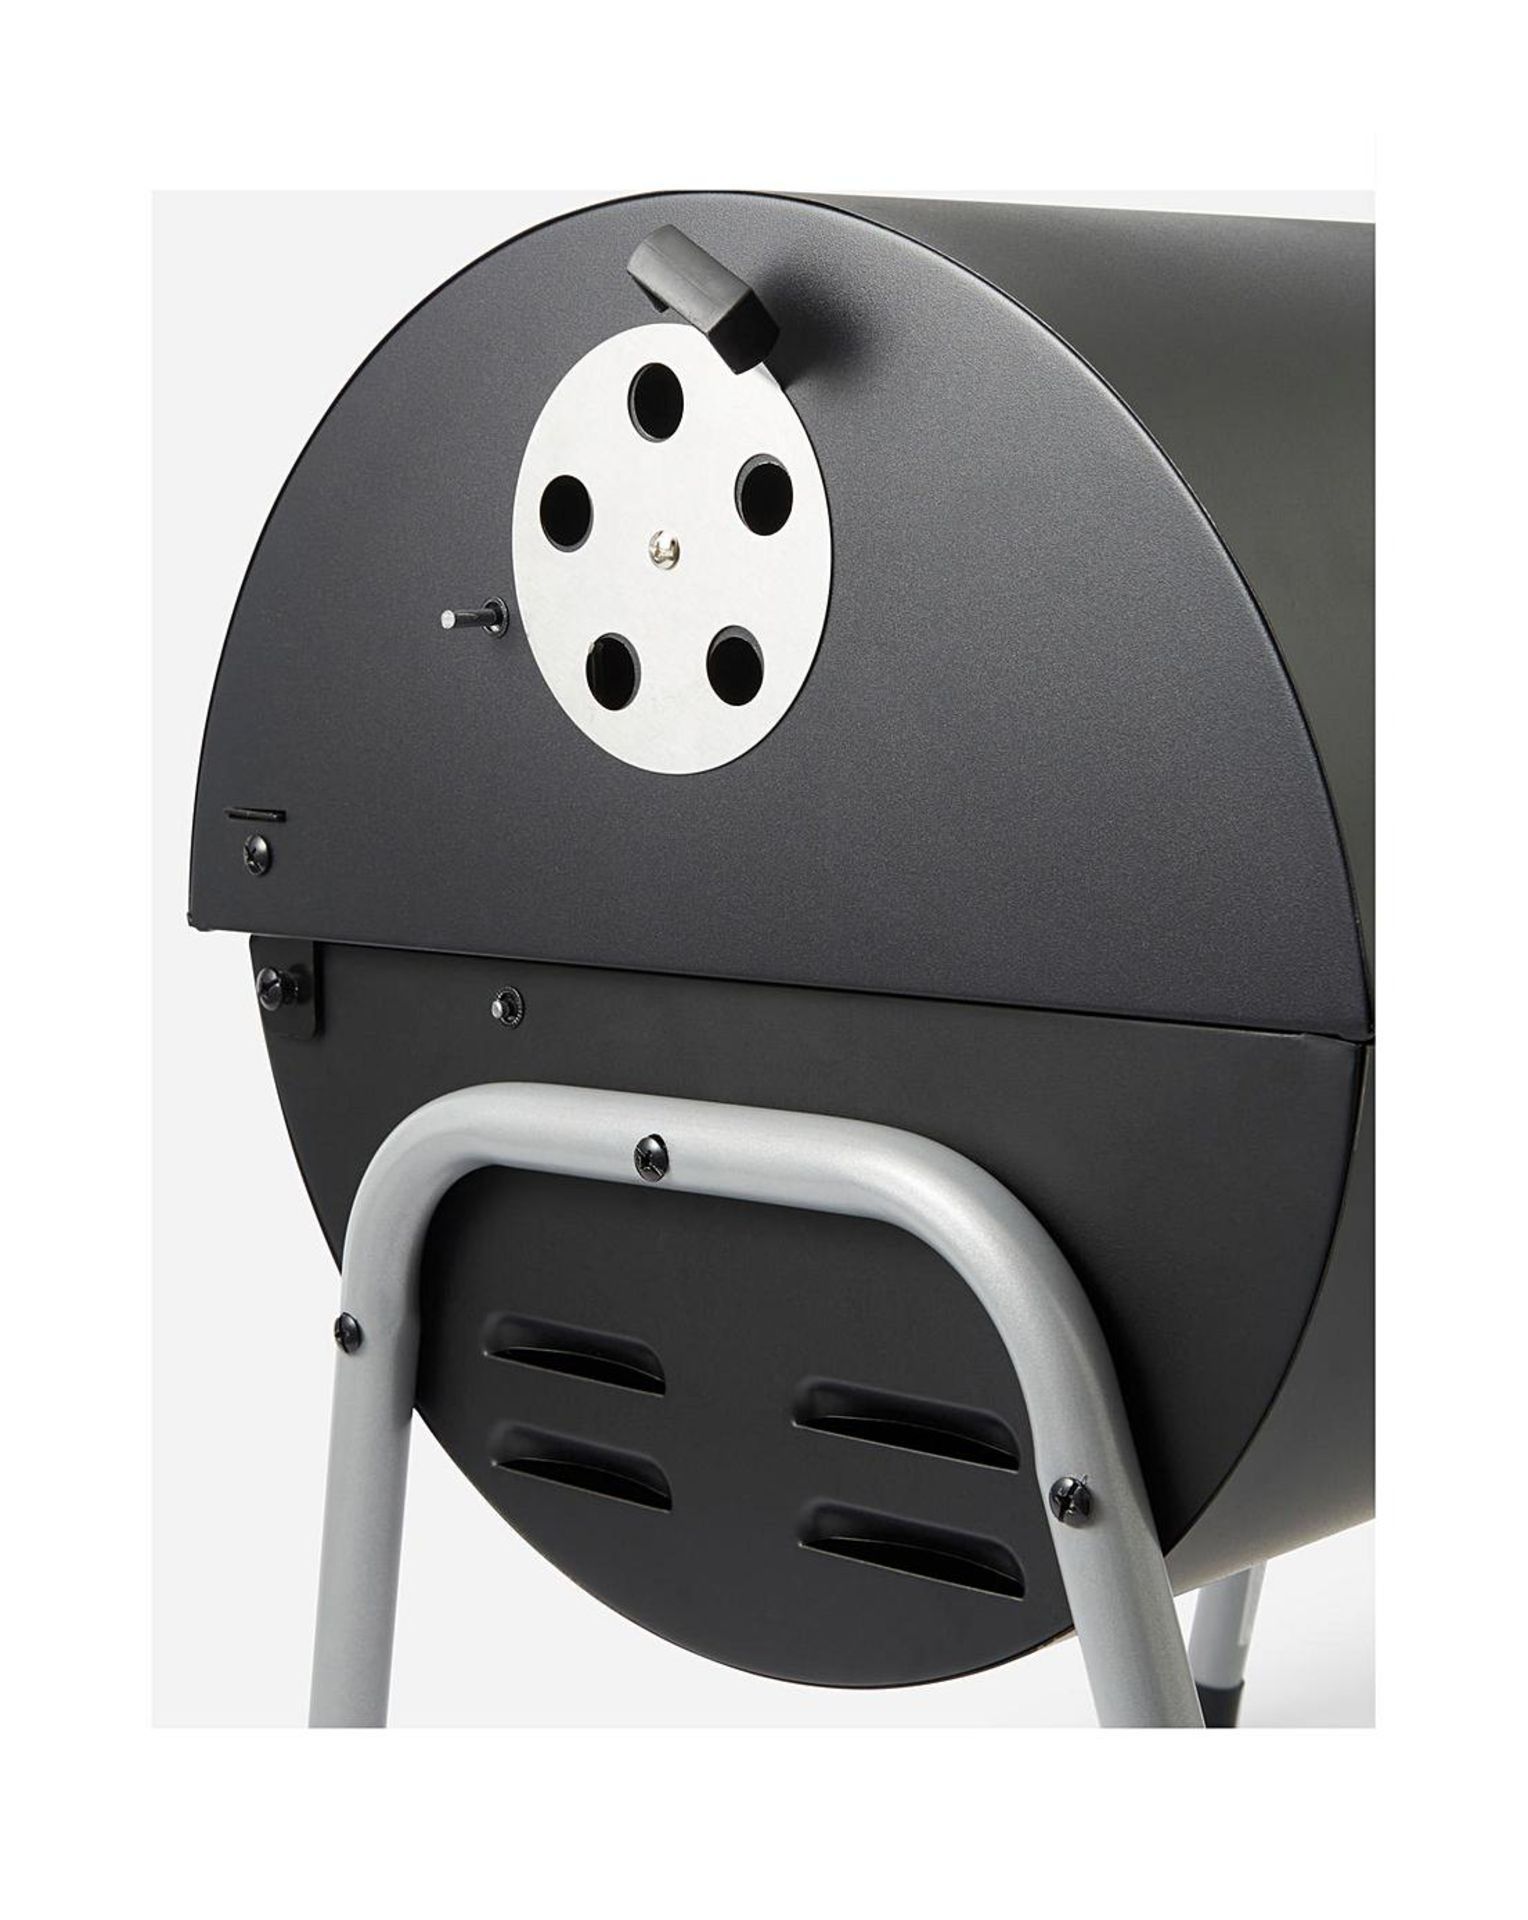 2x BRAND NEW Tabletop Oil Drum Barbeque Grill. RRP £59.99 EACH. Black steel firebowl with enamel - Image 4 of 4